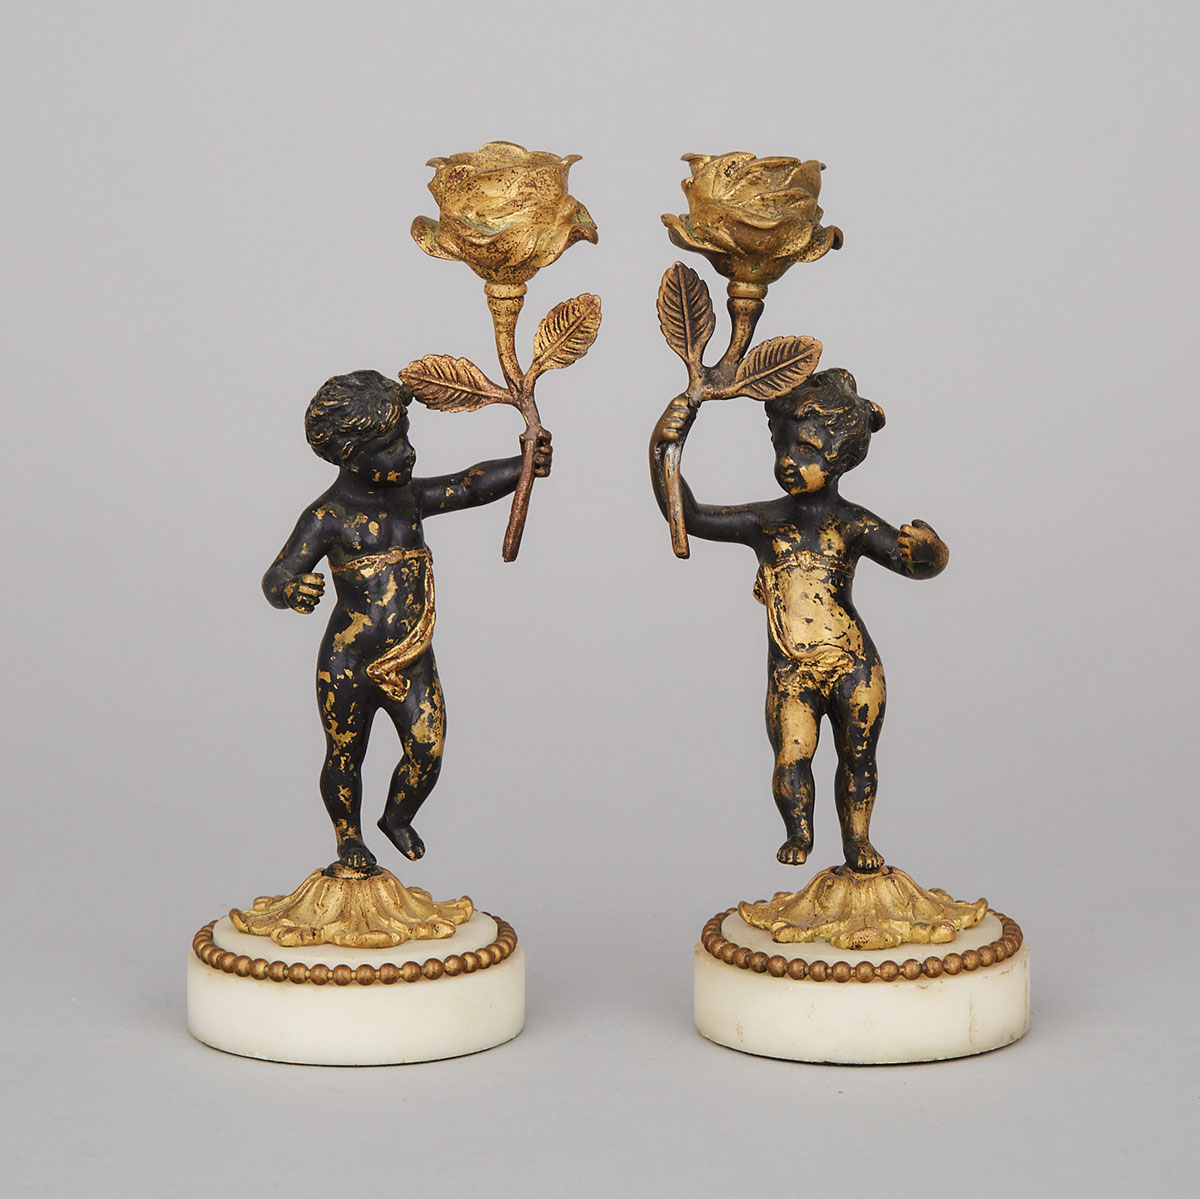 Pair of French Patinated and Gilt Bronze Figural Candlesticks, 19th century